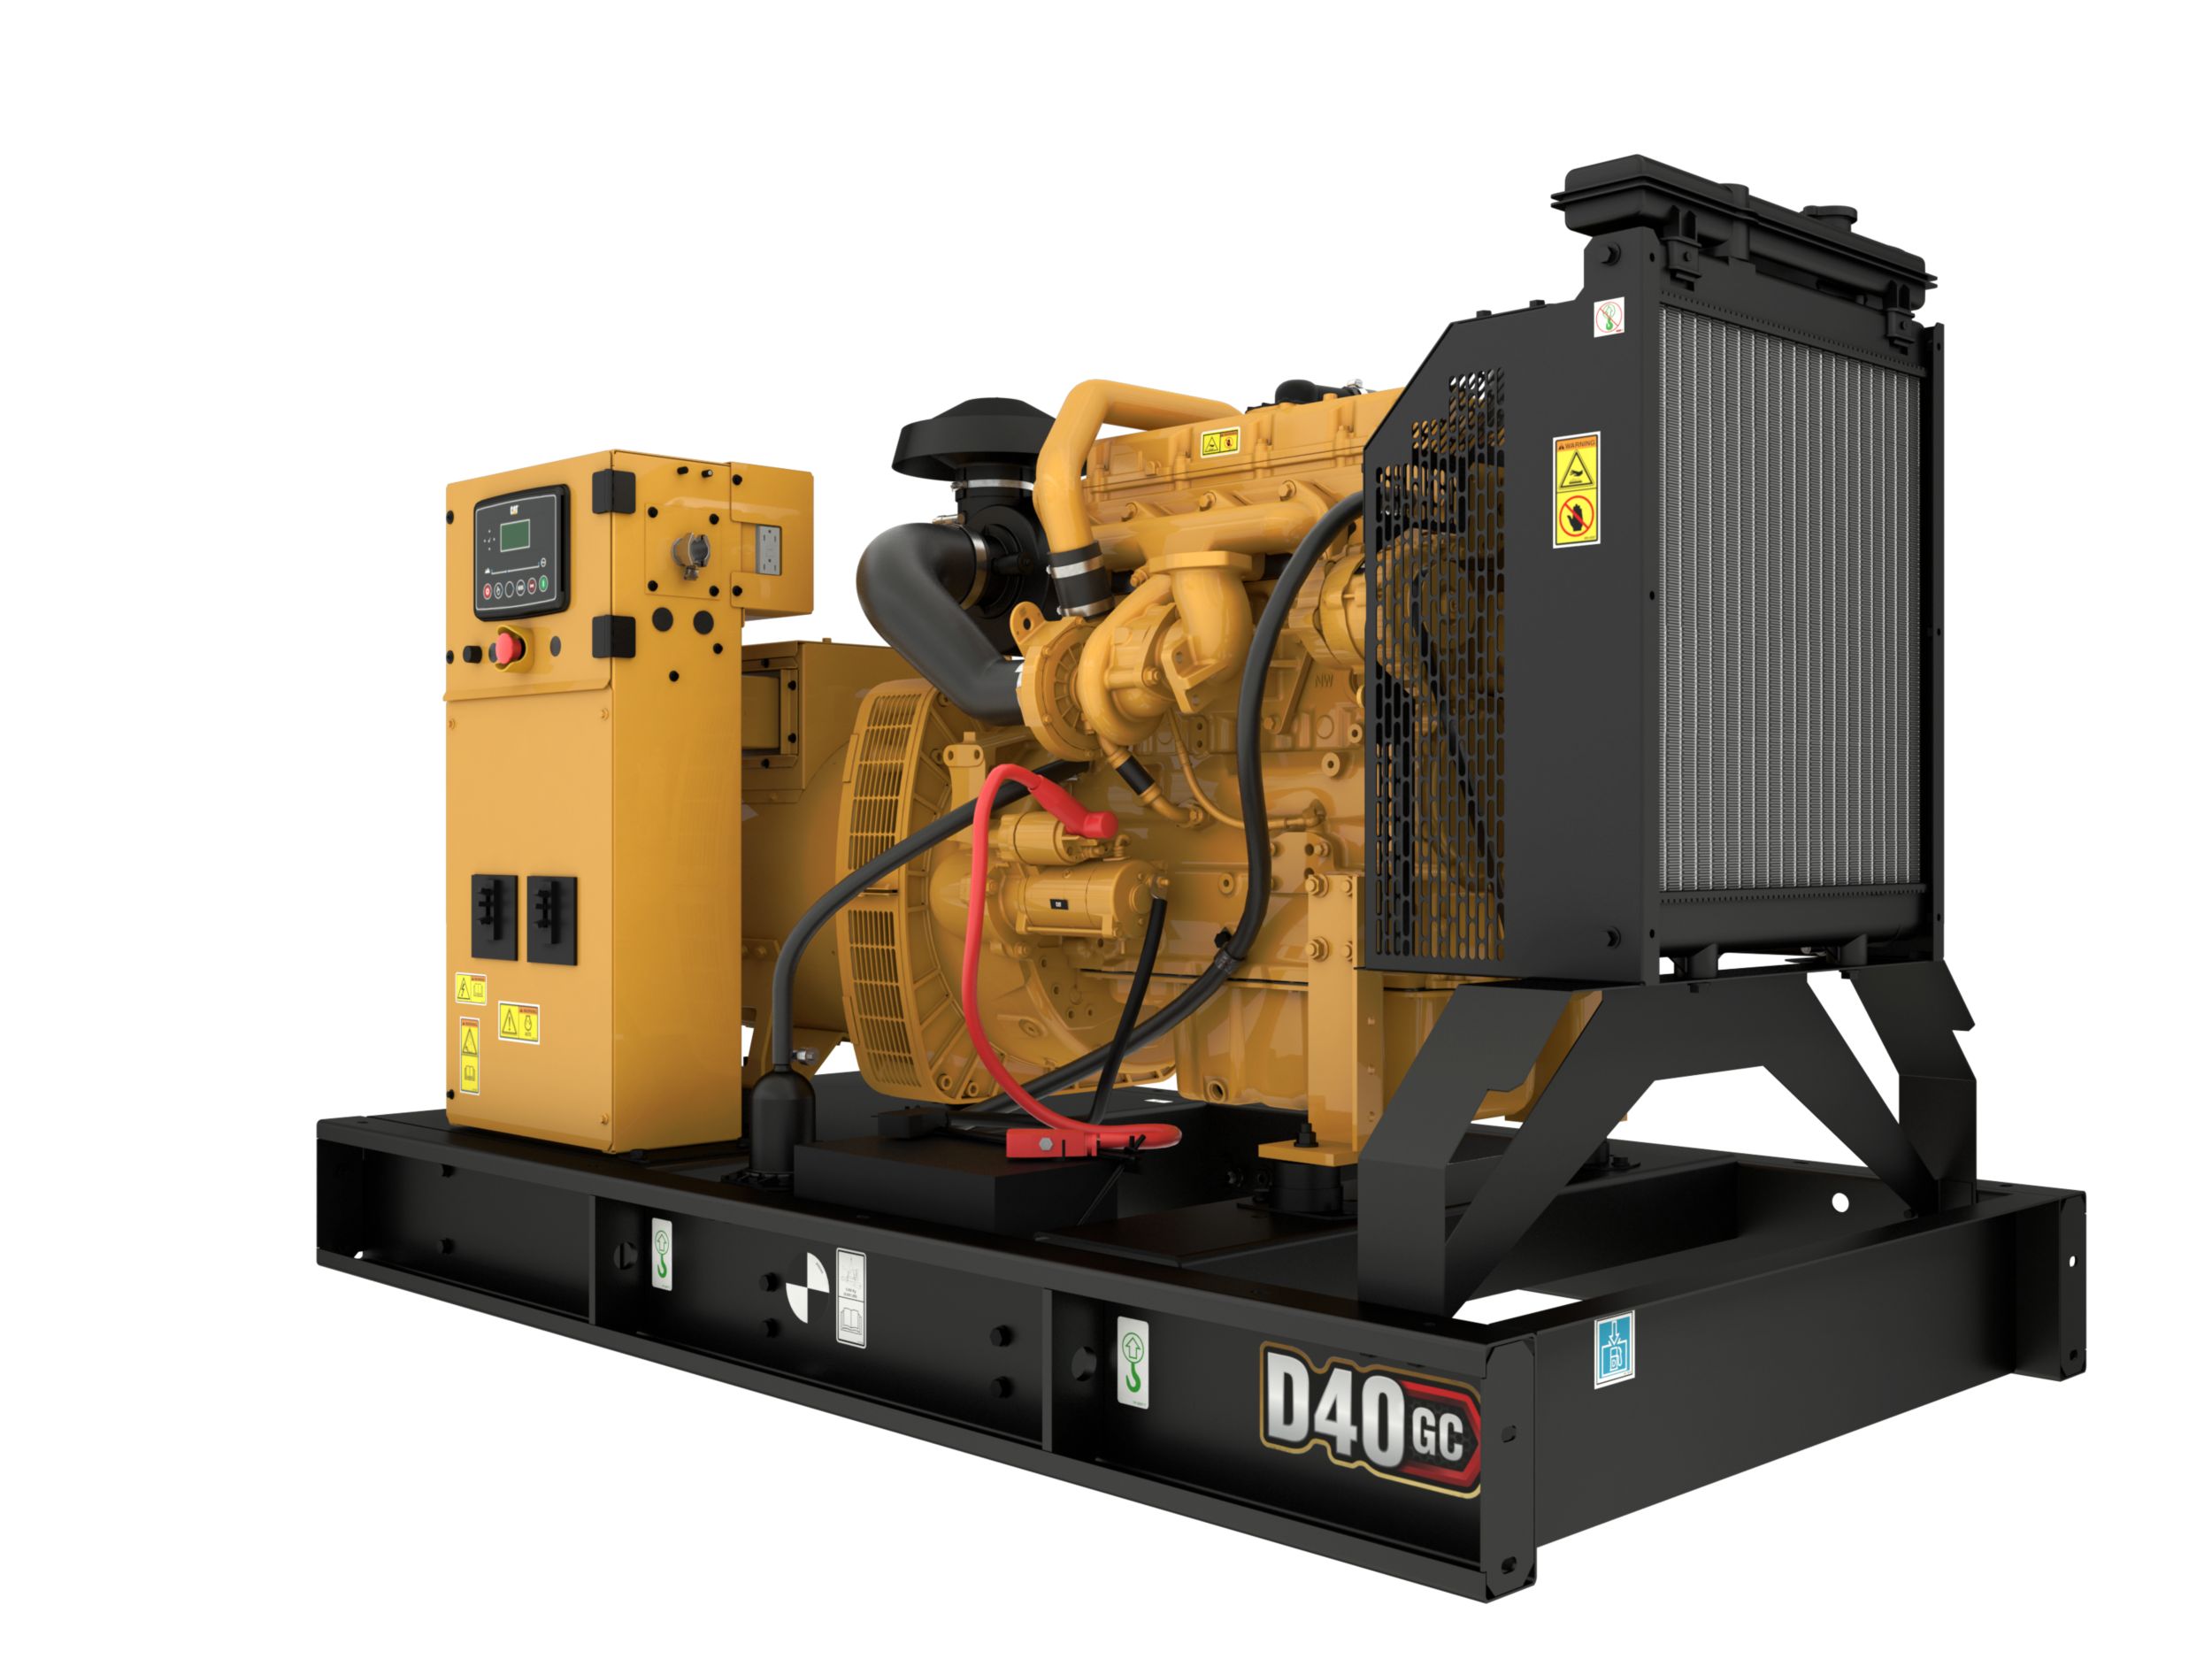 Is crying Four tyrant D40 C4.4 (60 HZ) | 40 kW Diesel Generator | Western States Cat